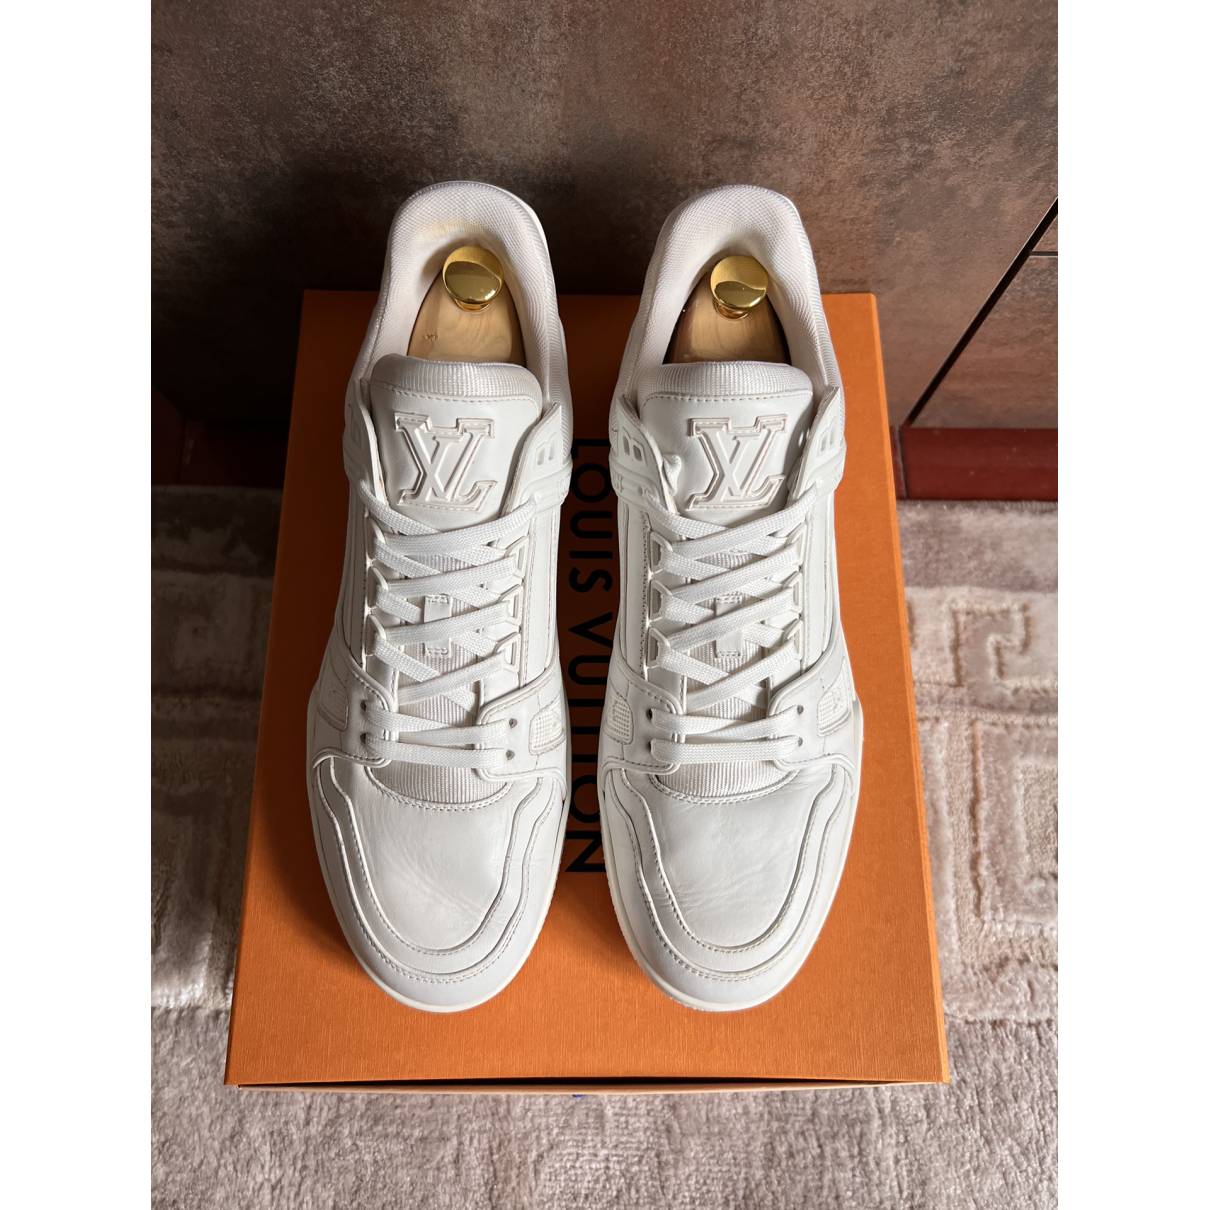 Lv trainer leather low trainers Louis Vuitton White size 44 EU in Leather -  23895648